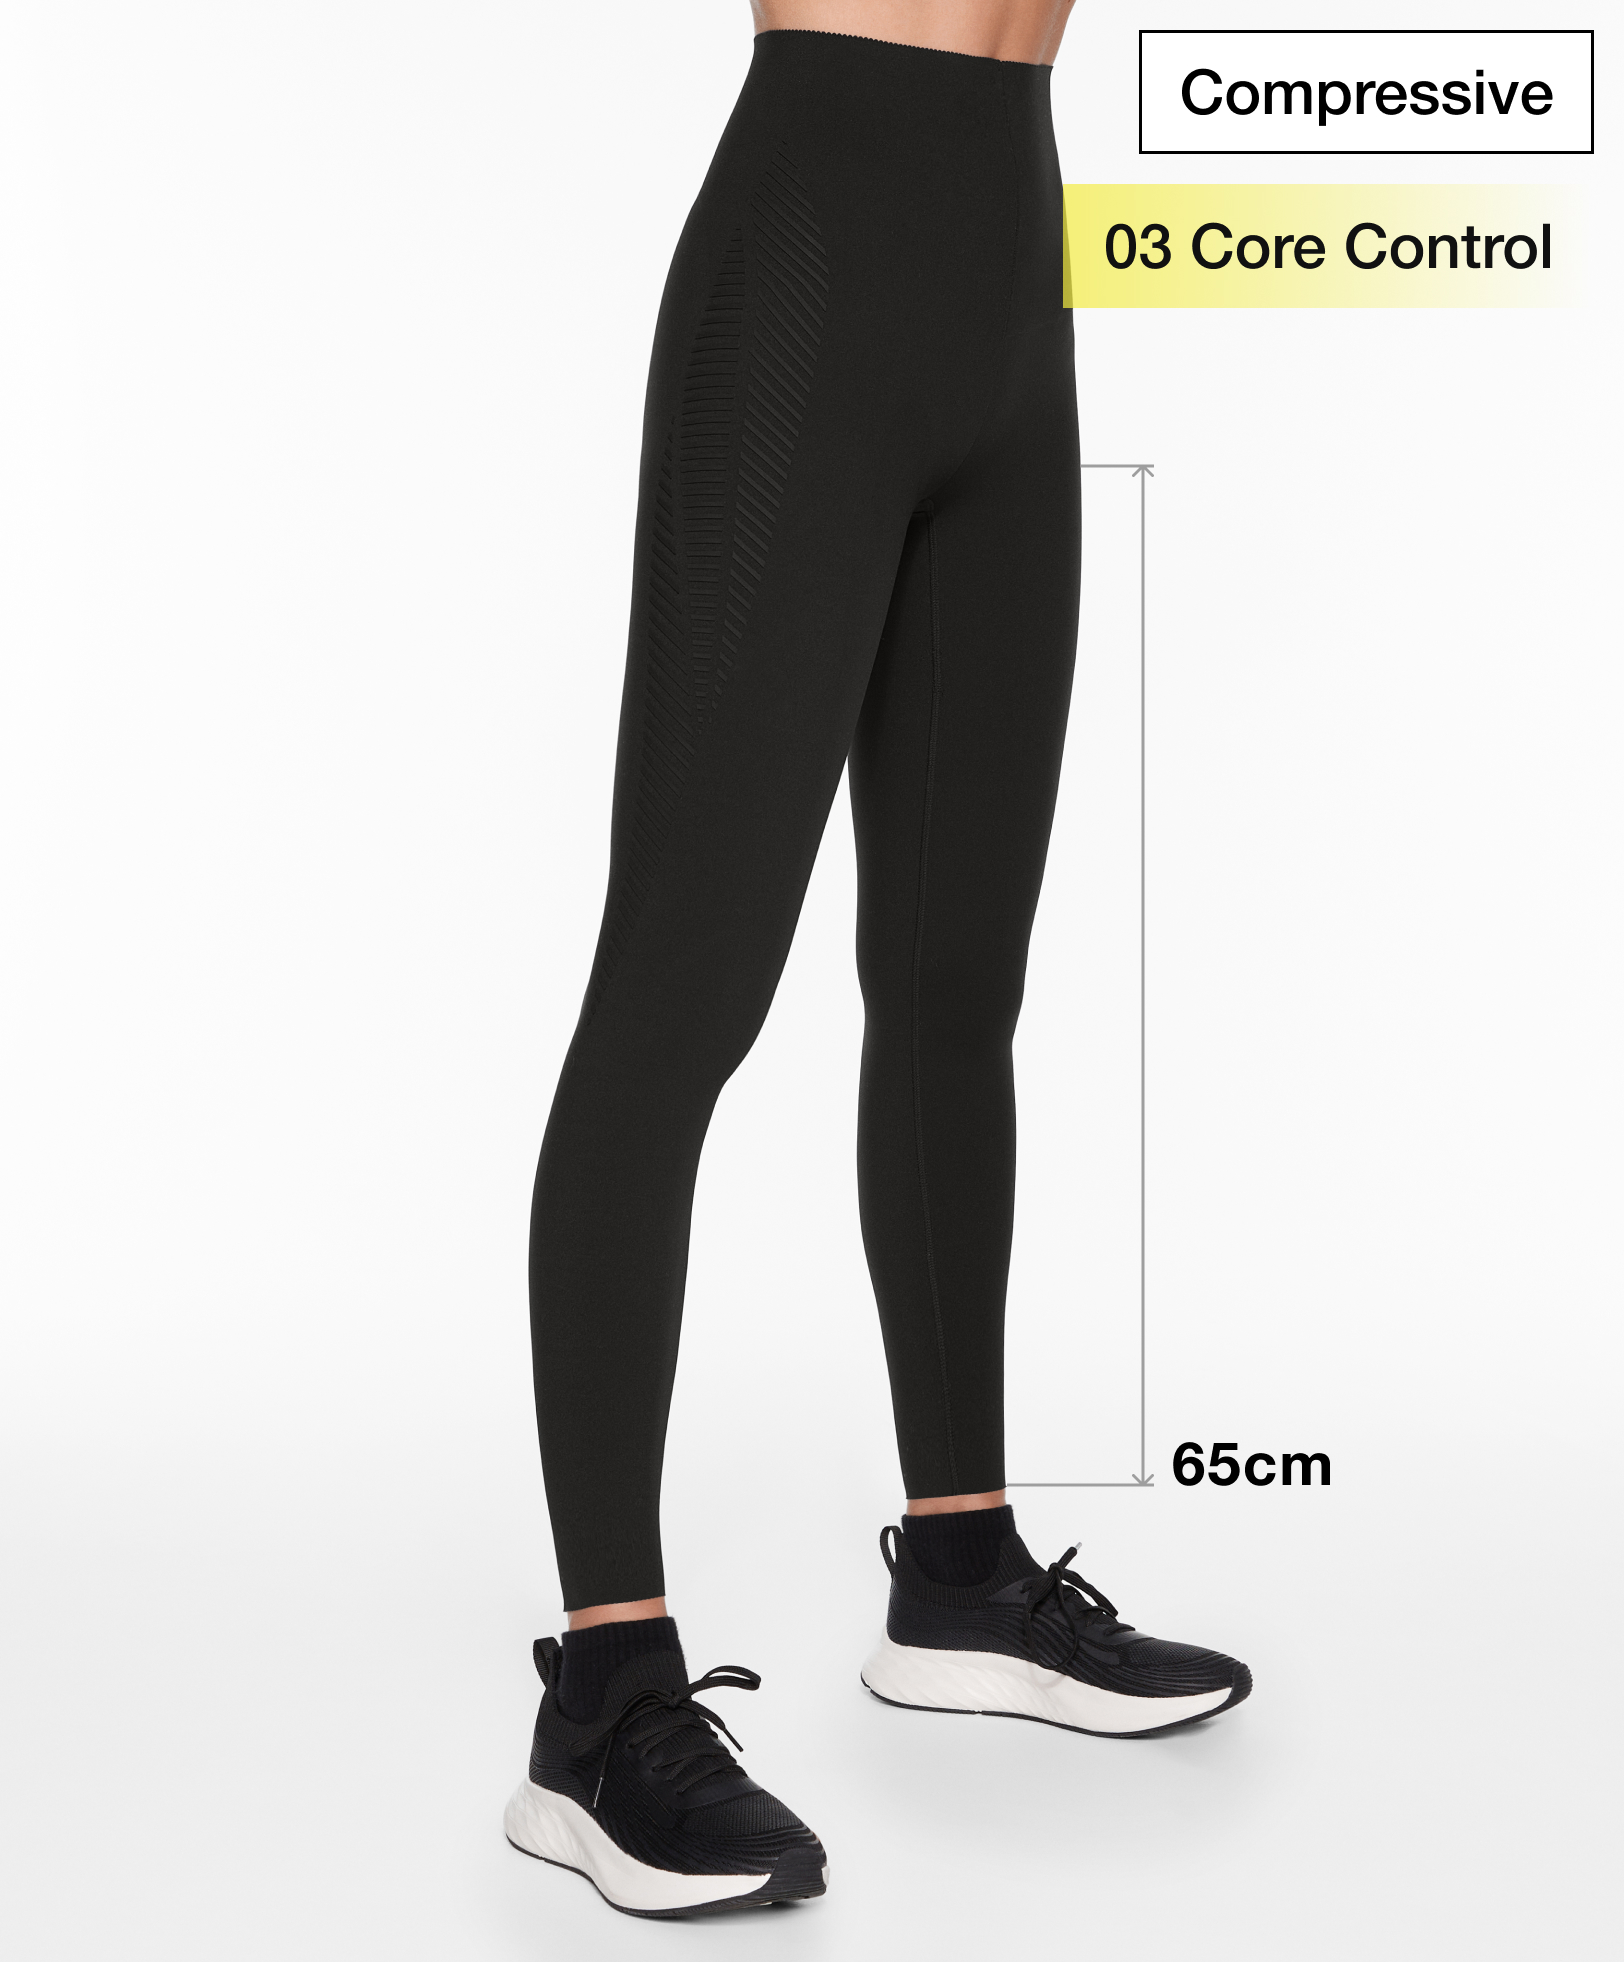 Calendered compressive core control 65cm ankle-length leggings